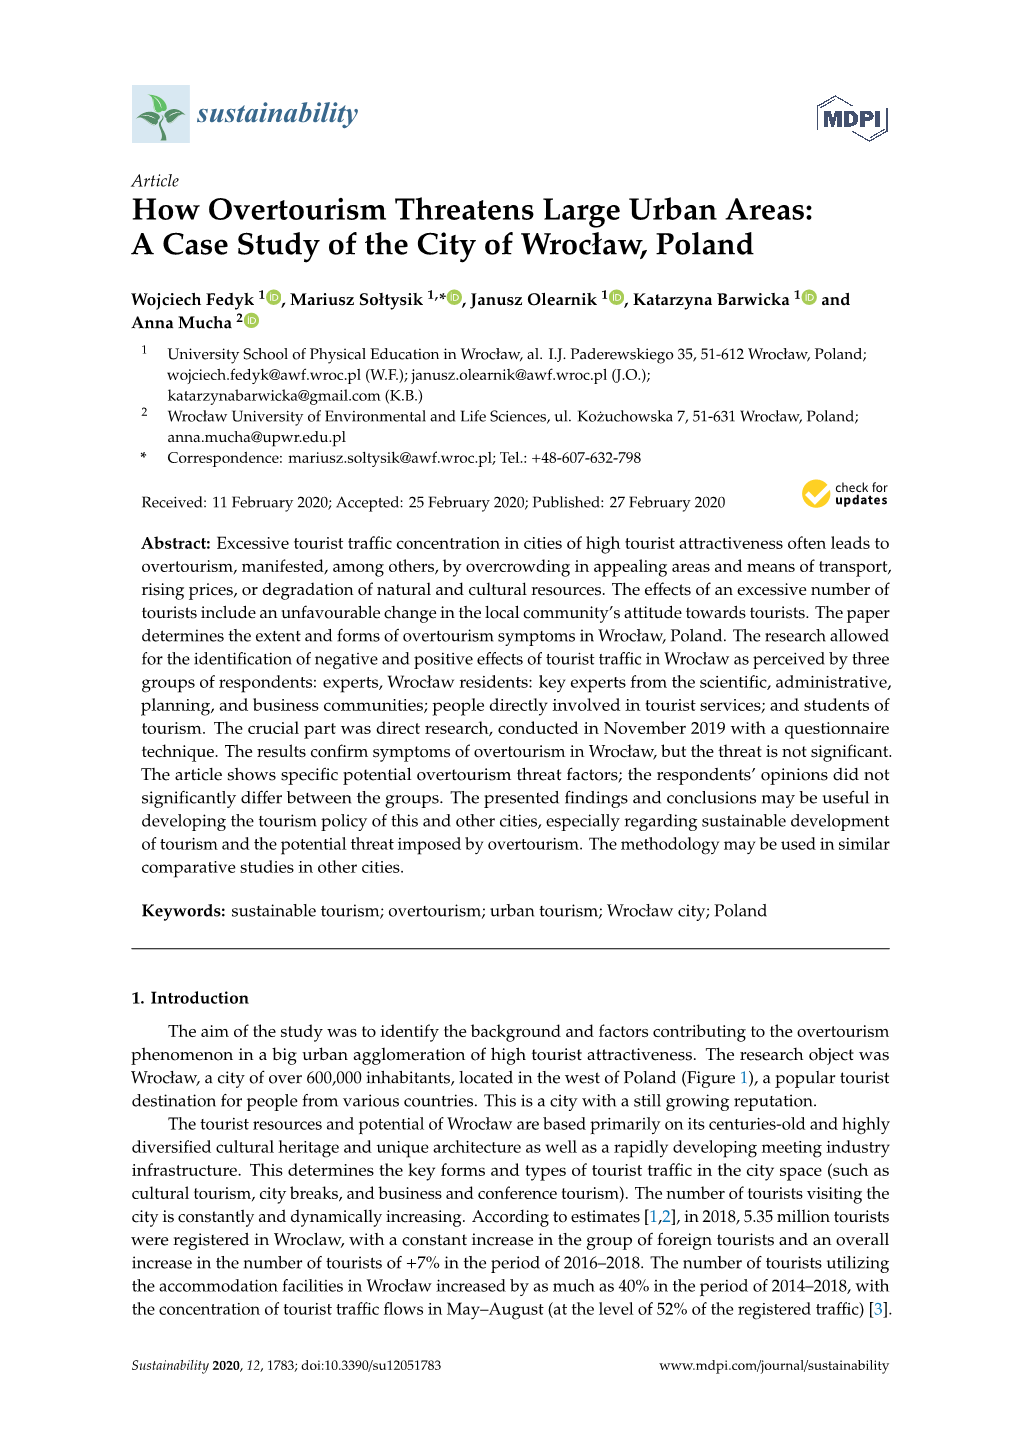 How Overtourism Threatens Large Urban Areas: a Case Study of the City of Wrocław, Poland